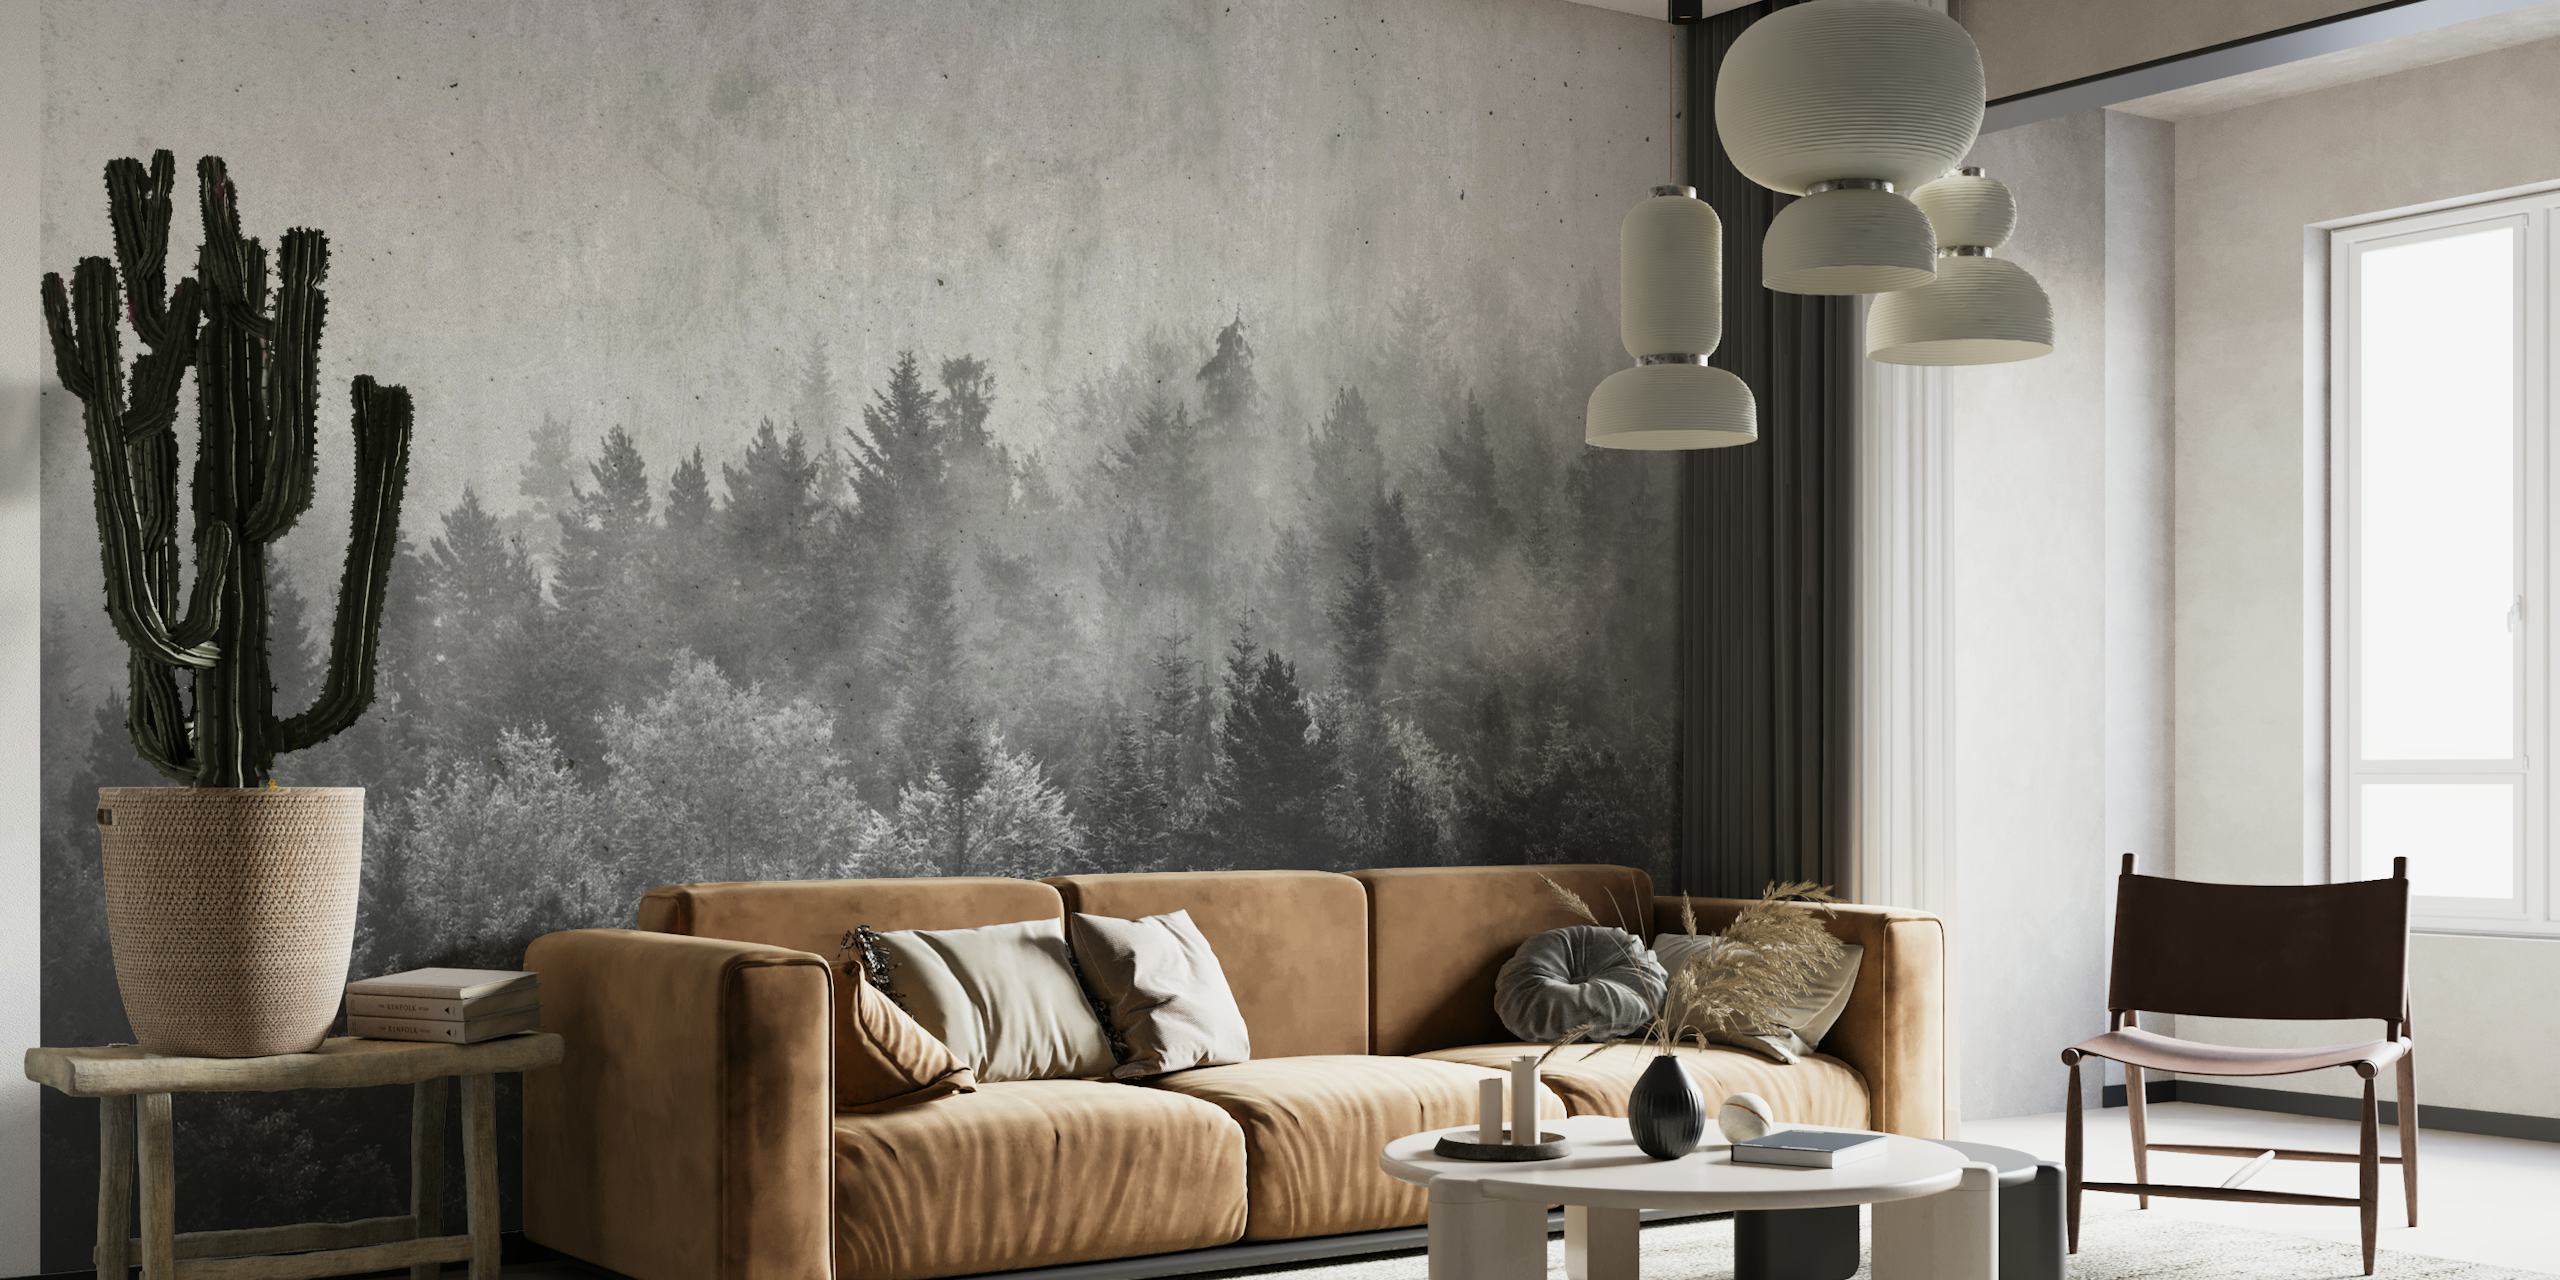 Monochrome foggy forest wall mural with trees fading into mist